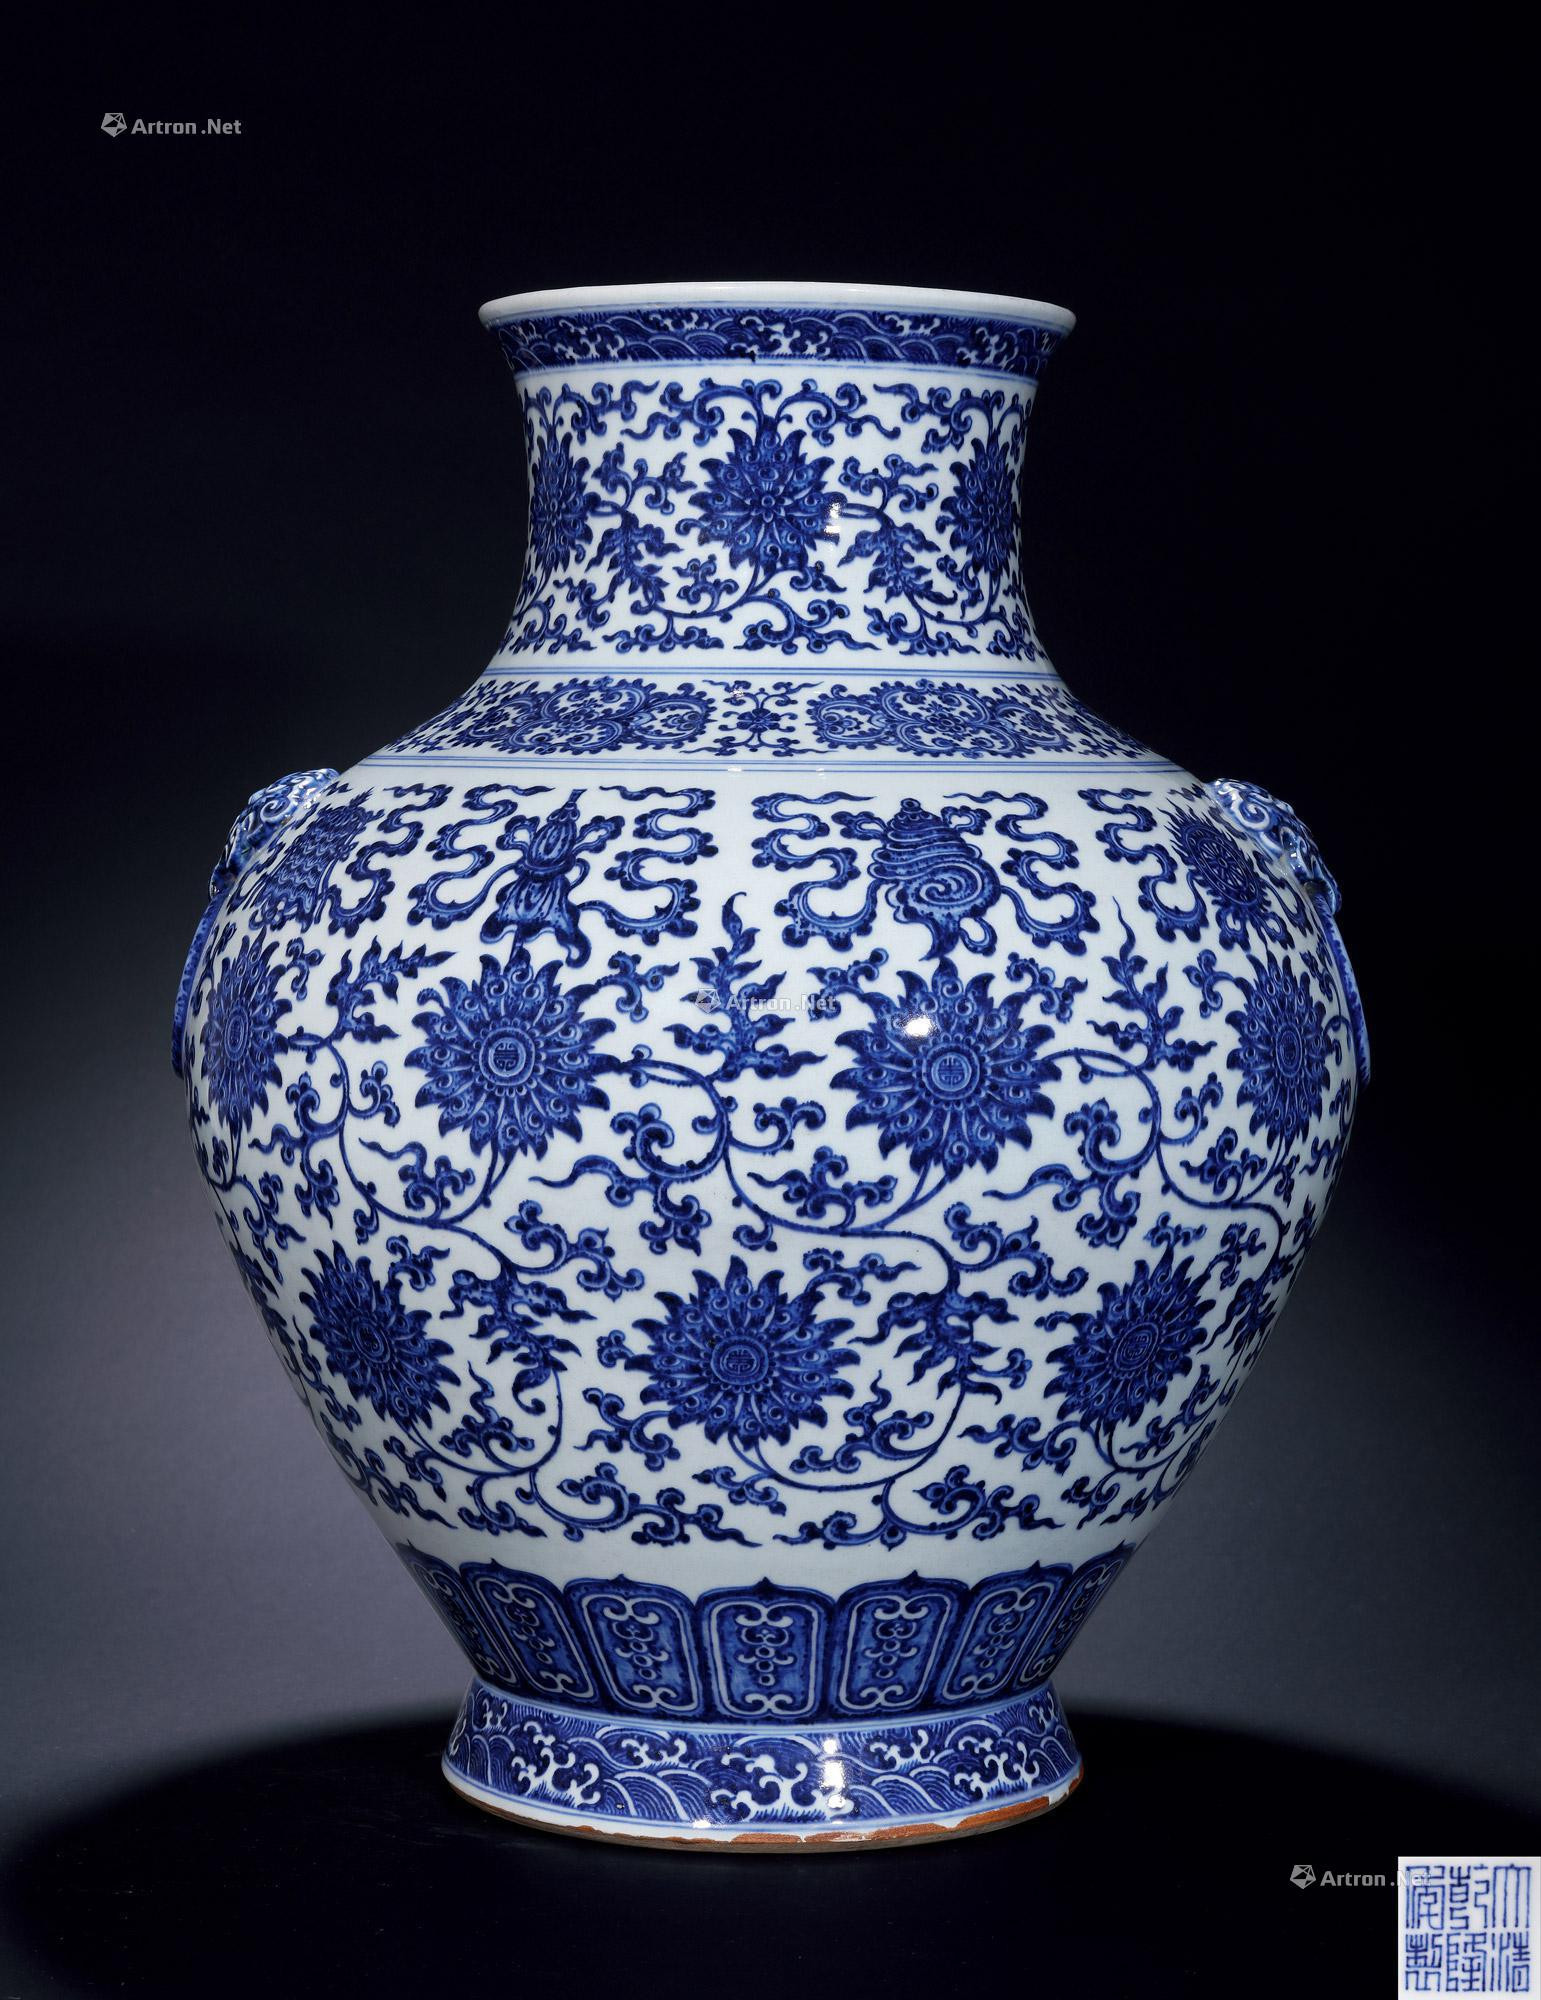 A BLUE-AND-WHITE EIGHT-TREASURE WITH SCROLLING LOTUS PATTERN VASE